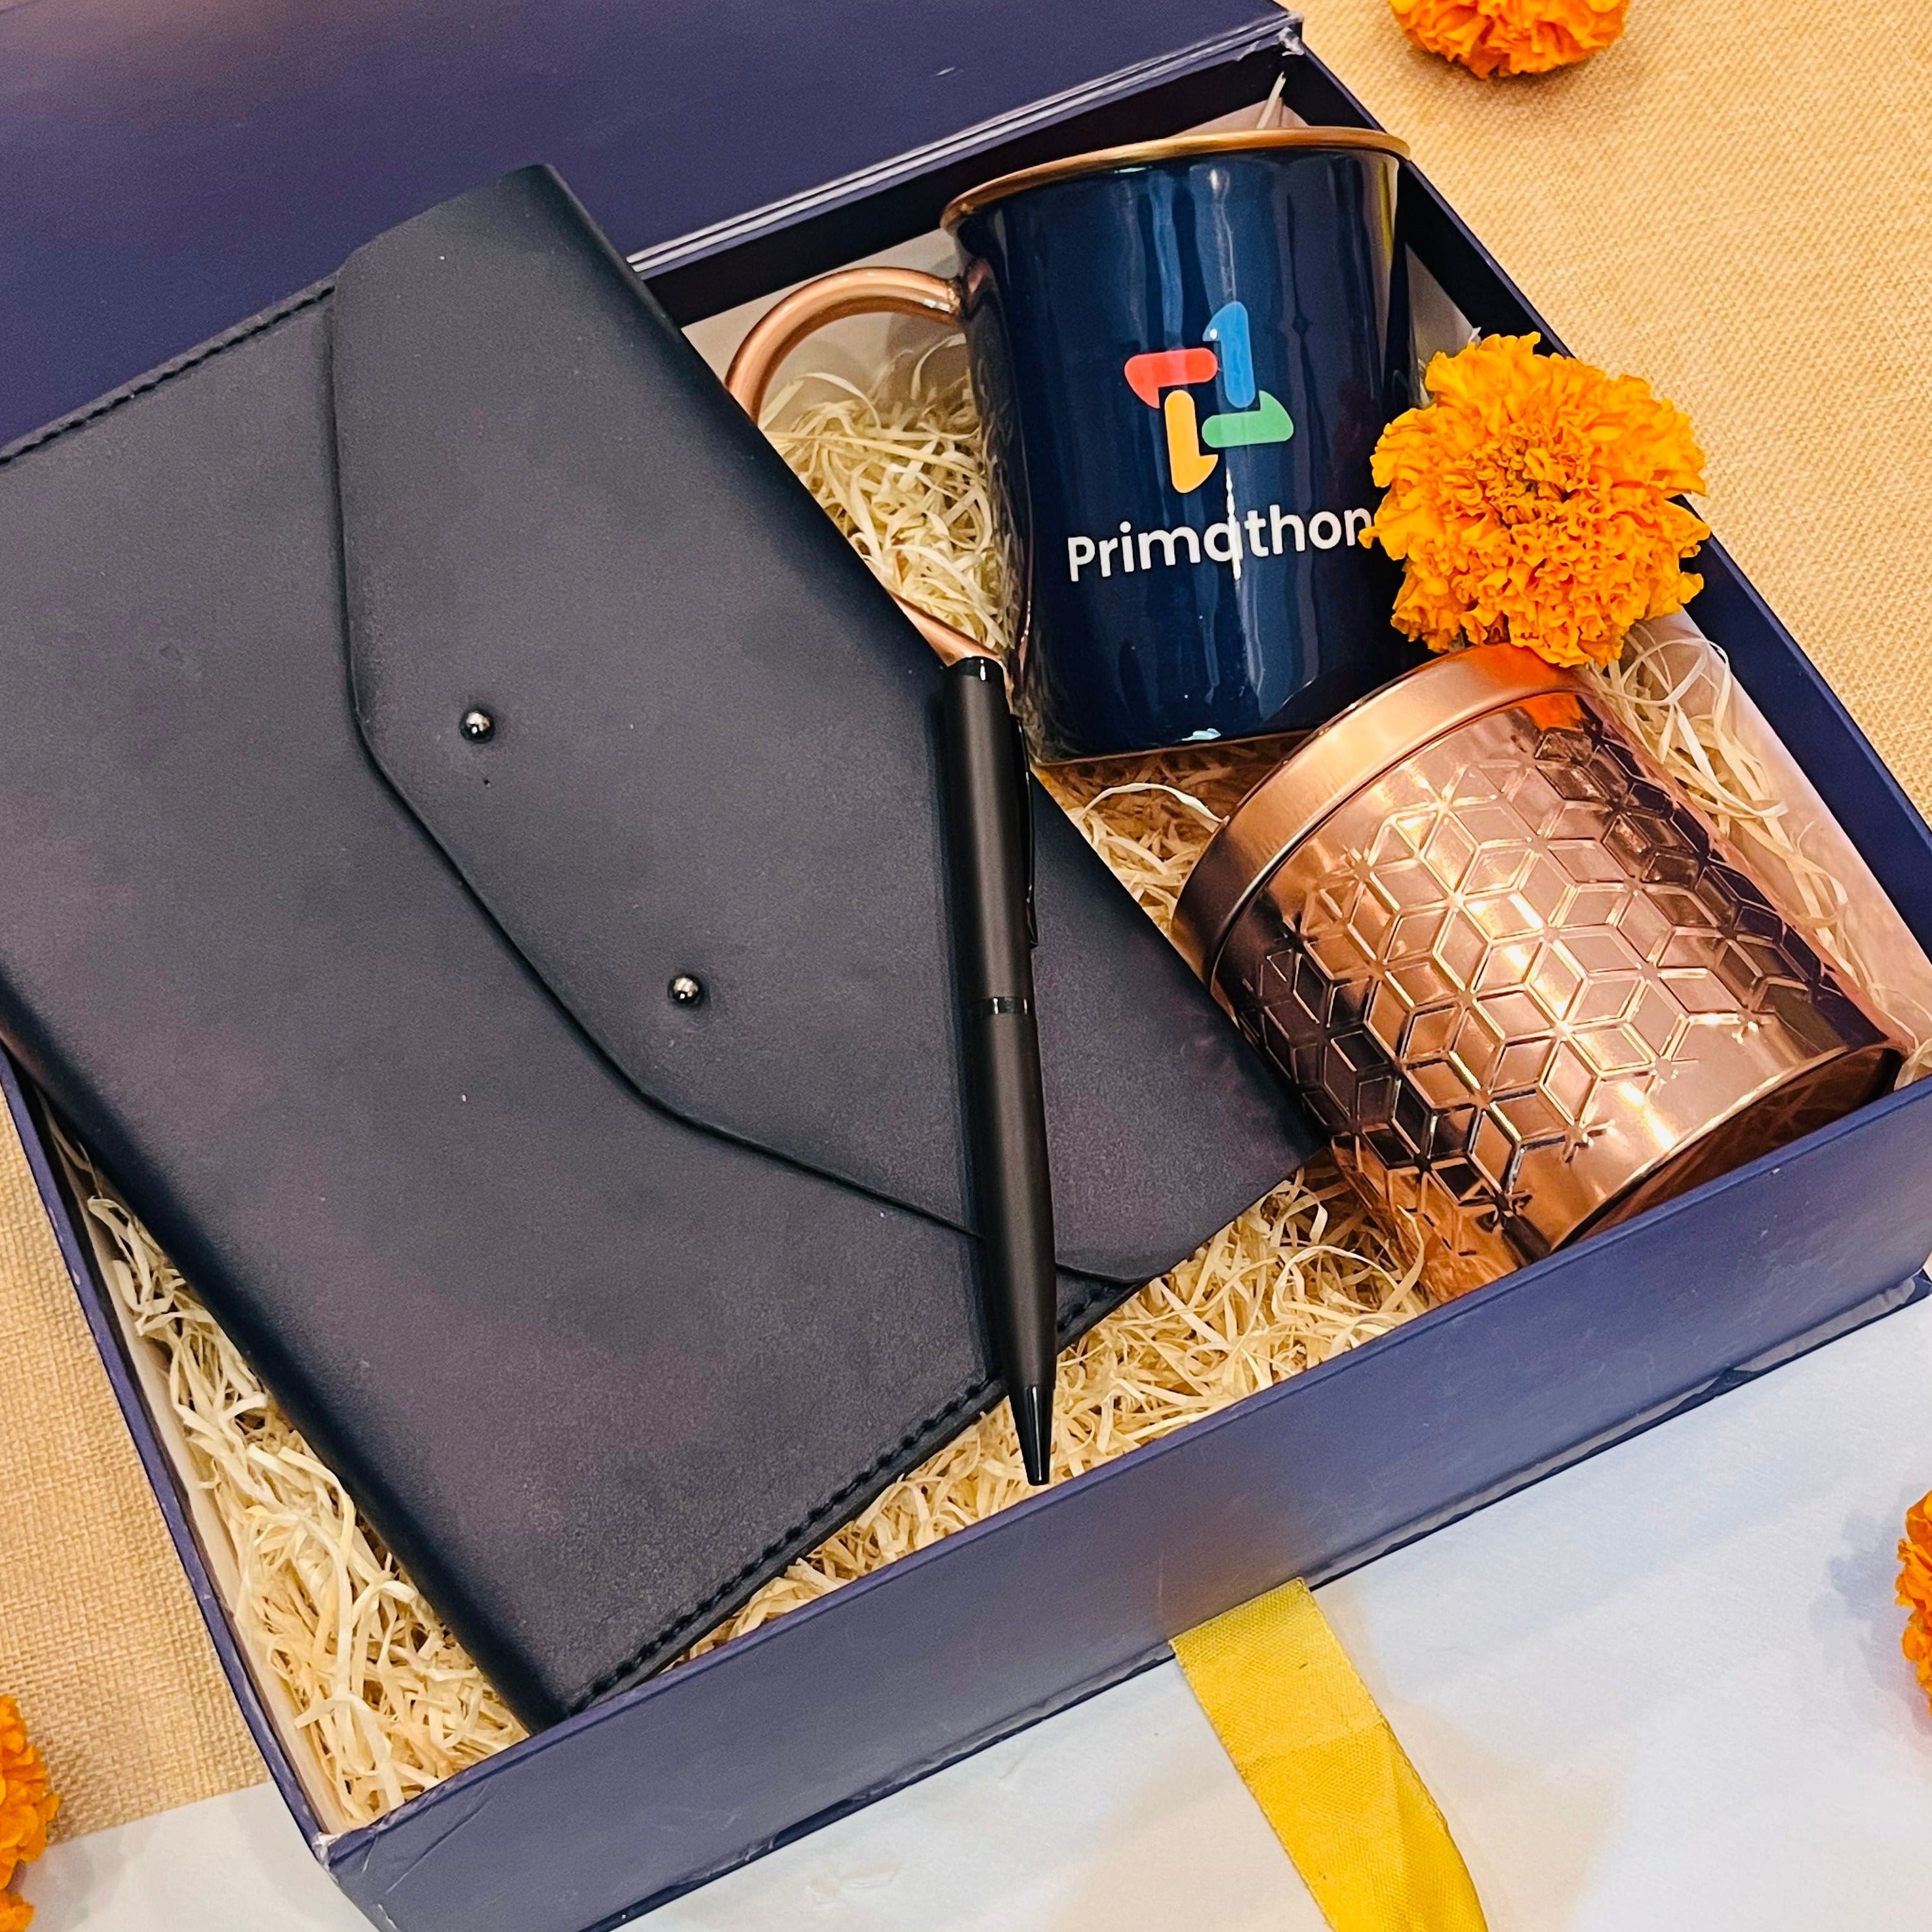 Corporate Hamper for Corporate Gifts and Diwali